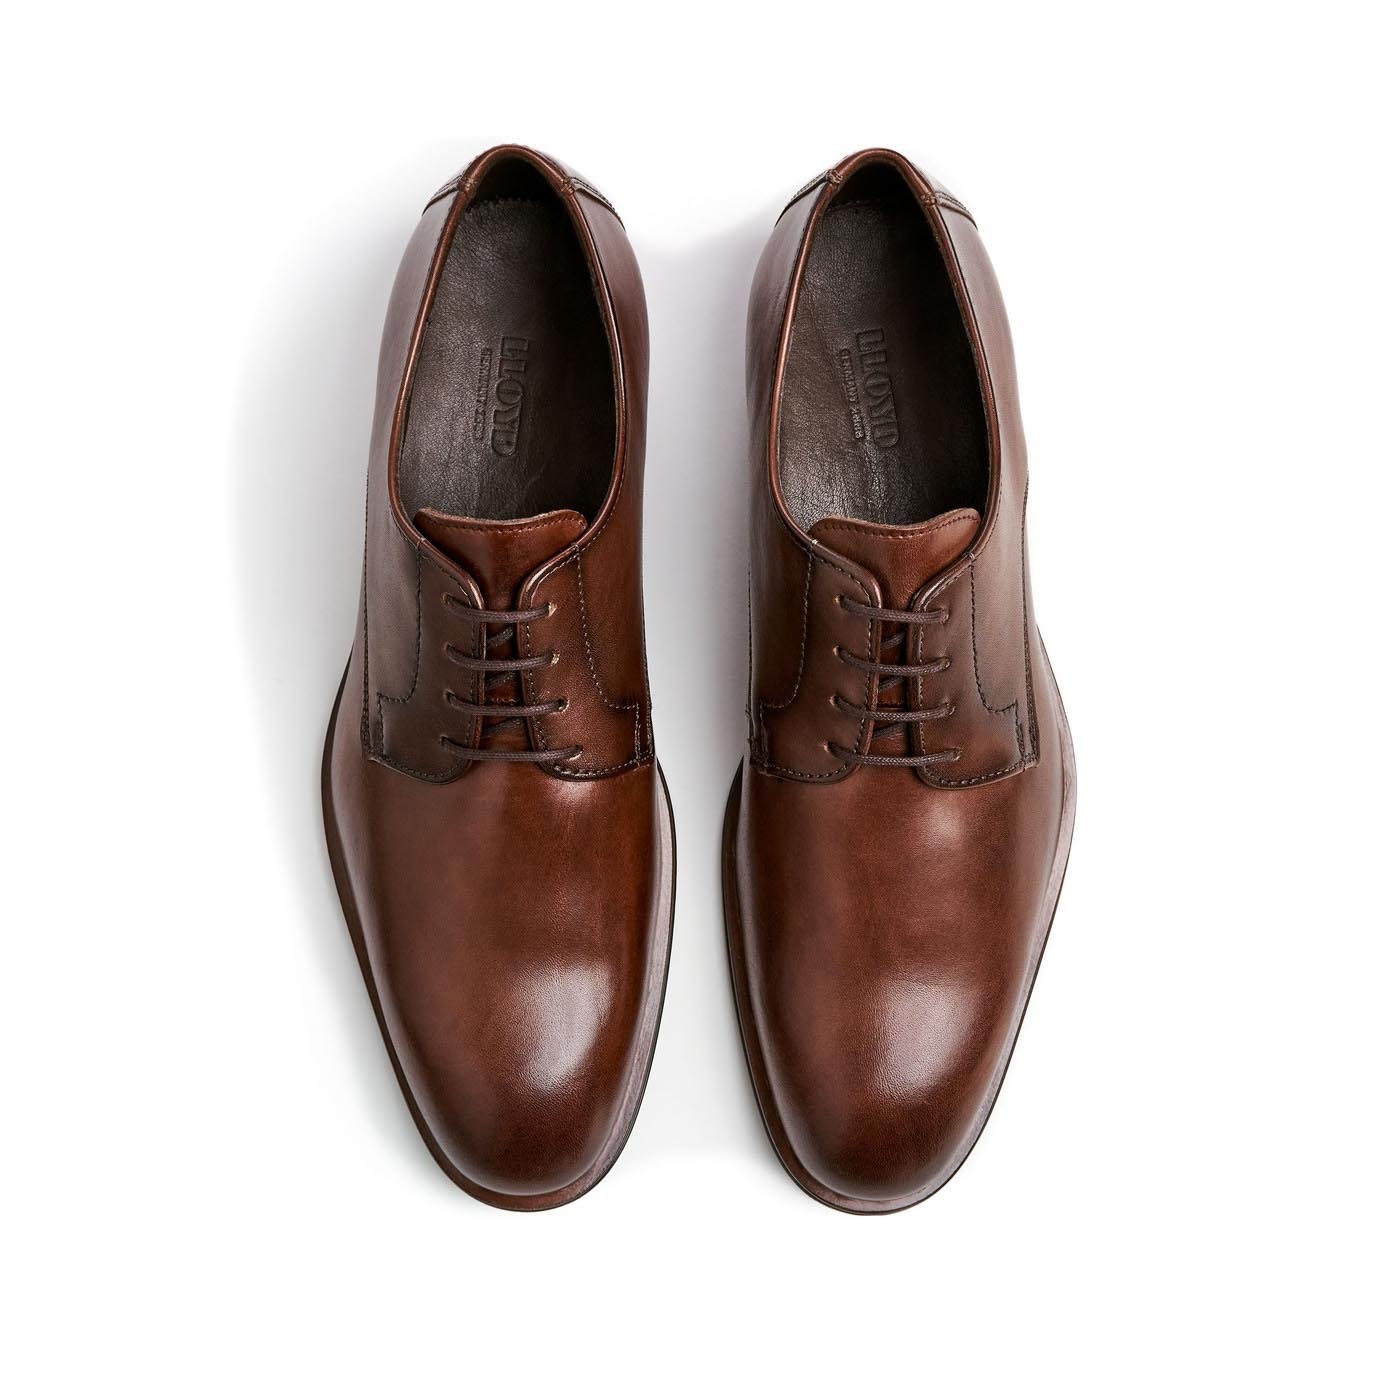 top view of the rounded toe of the brown leather dress shoes.